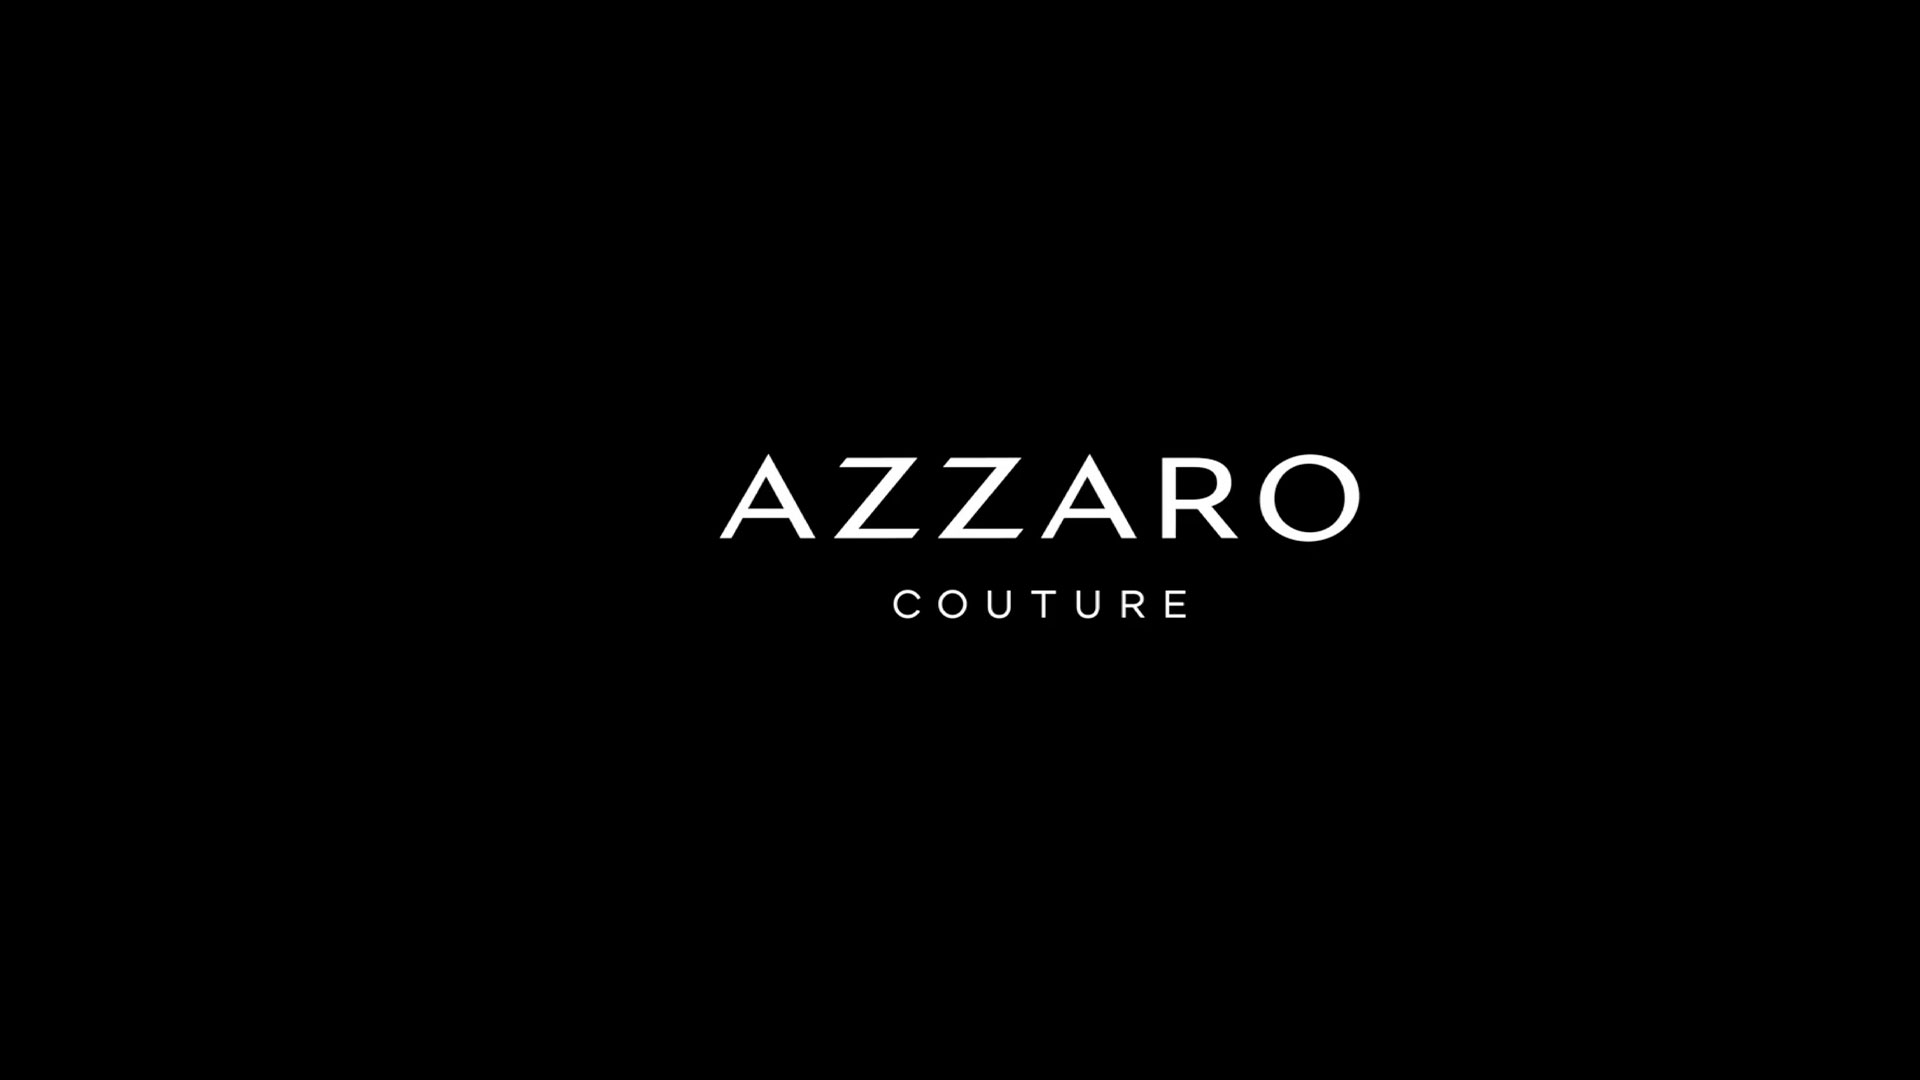 AZZARO COUTUREFALL-WINTER 2021-2022 COLLECTION